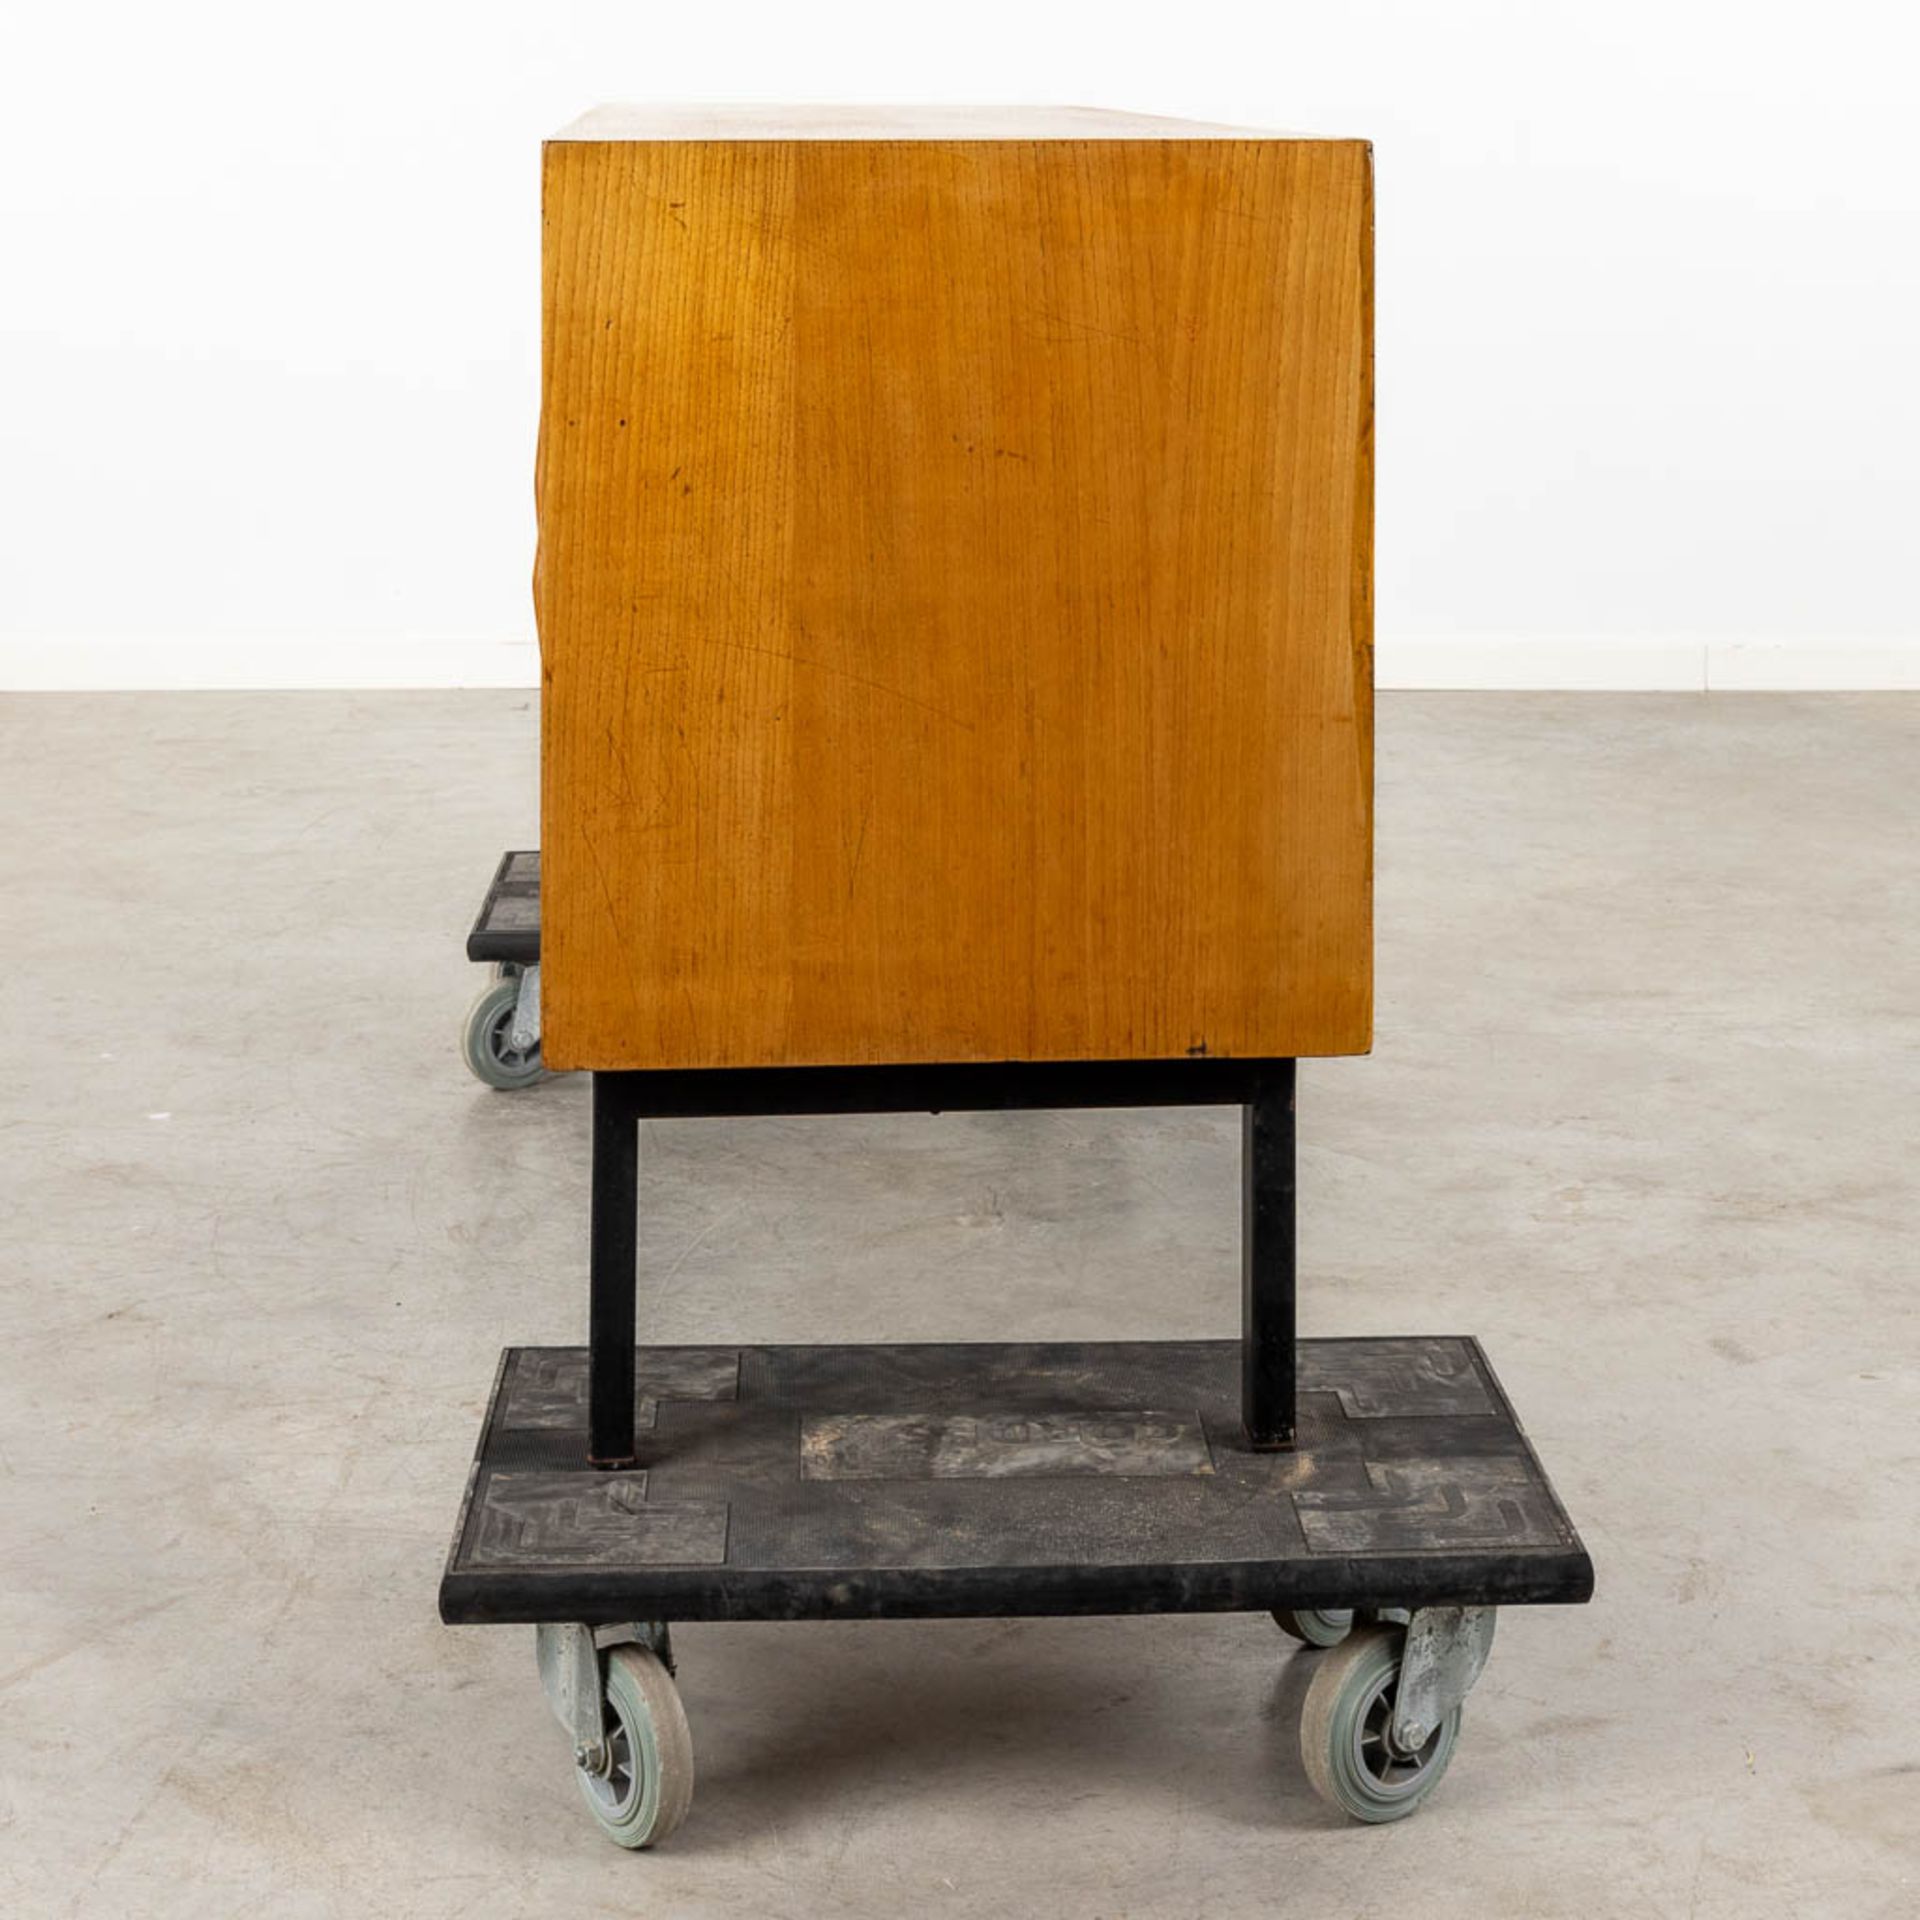 Charlotte PERRIAND (1903-1999) 'Cansado' a sideboard (D:47 x W:158 x H:73 cm) - Image 6 of 16